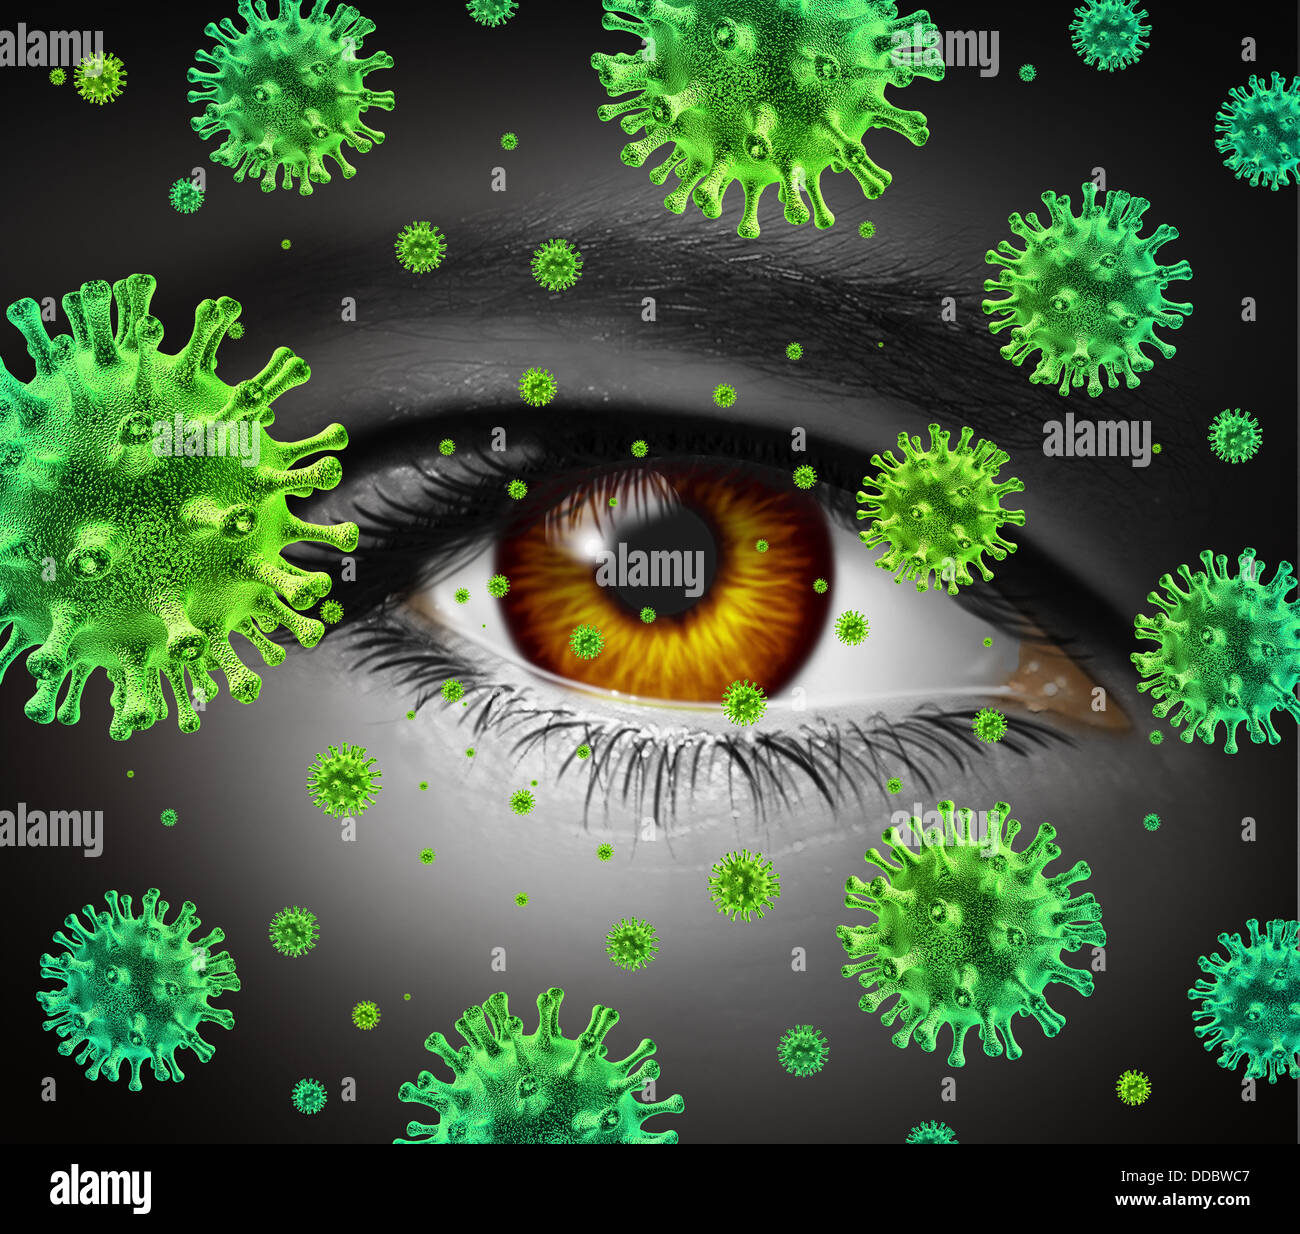 Eye infection as a contagious ocular disease transmitting a virus with human vision spreading dangerous infectious germs and bacteria during cold or flu symptoms. Stock Photo